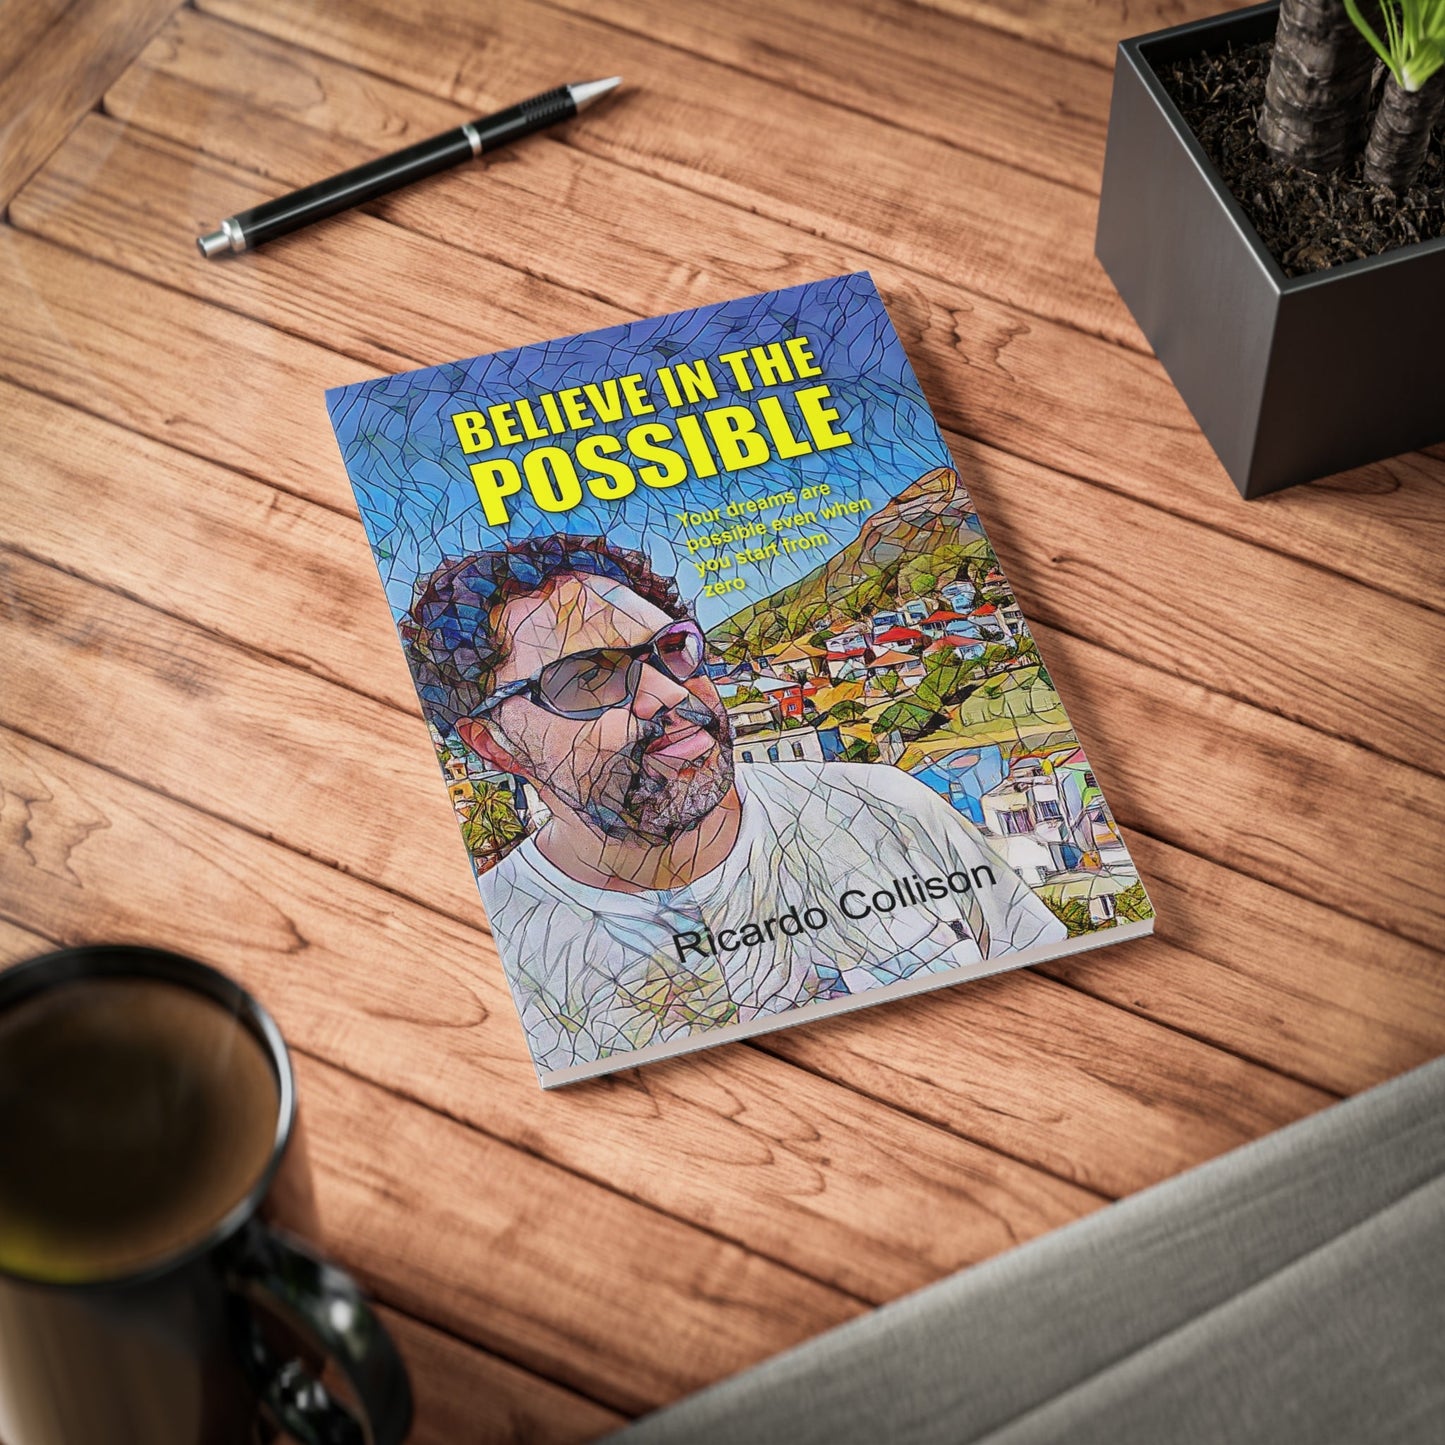 Believe in the Possible - self-help